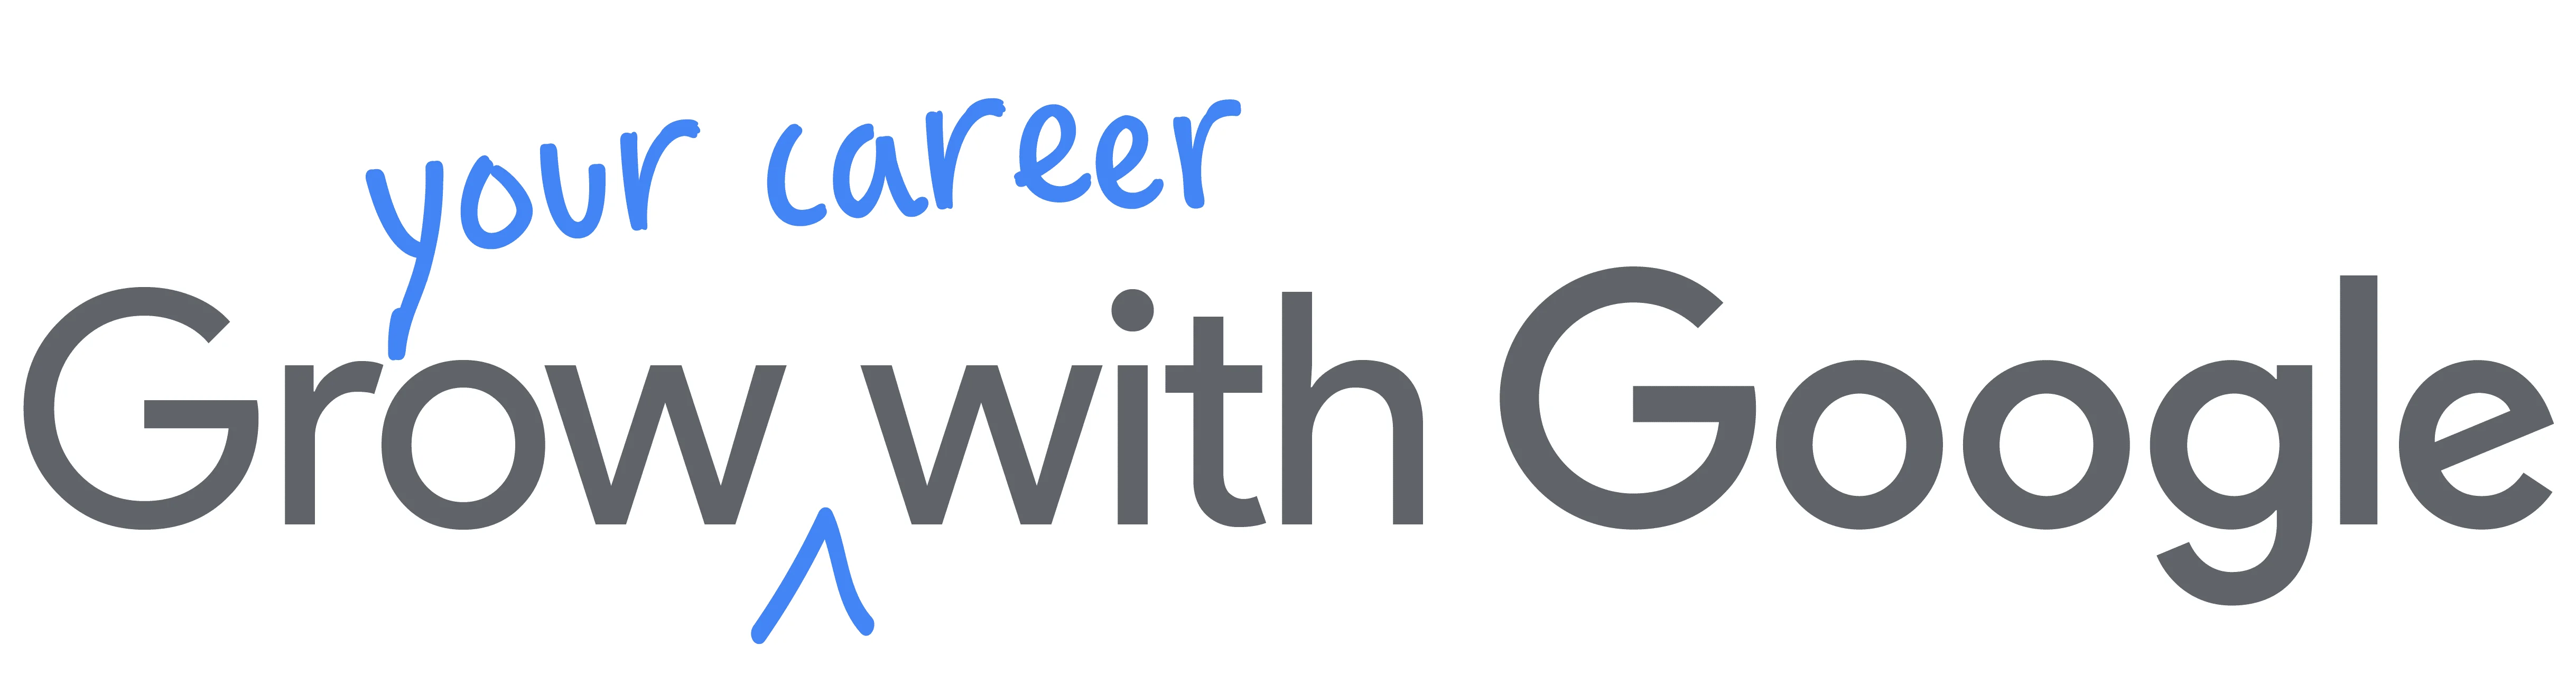 Explore Career Resources for Diverse Groups - Grow with Google